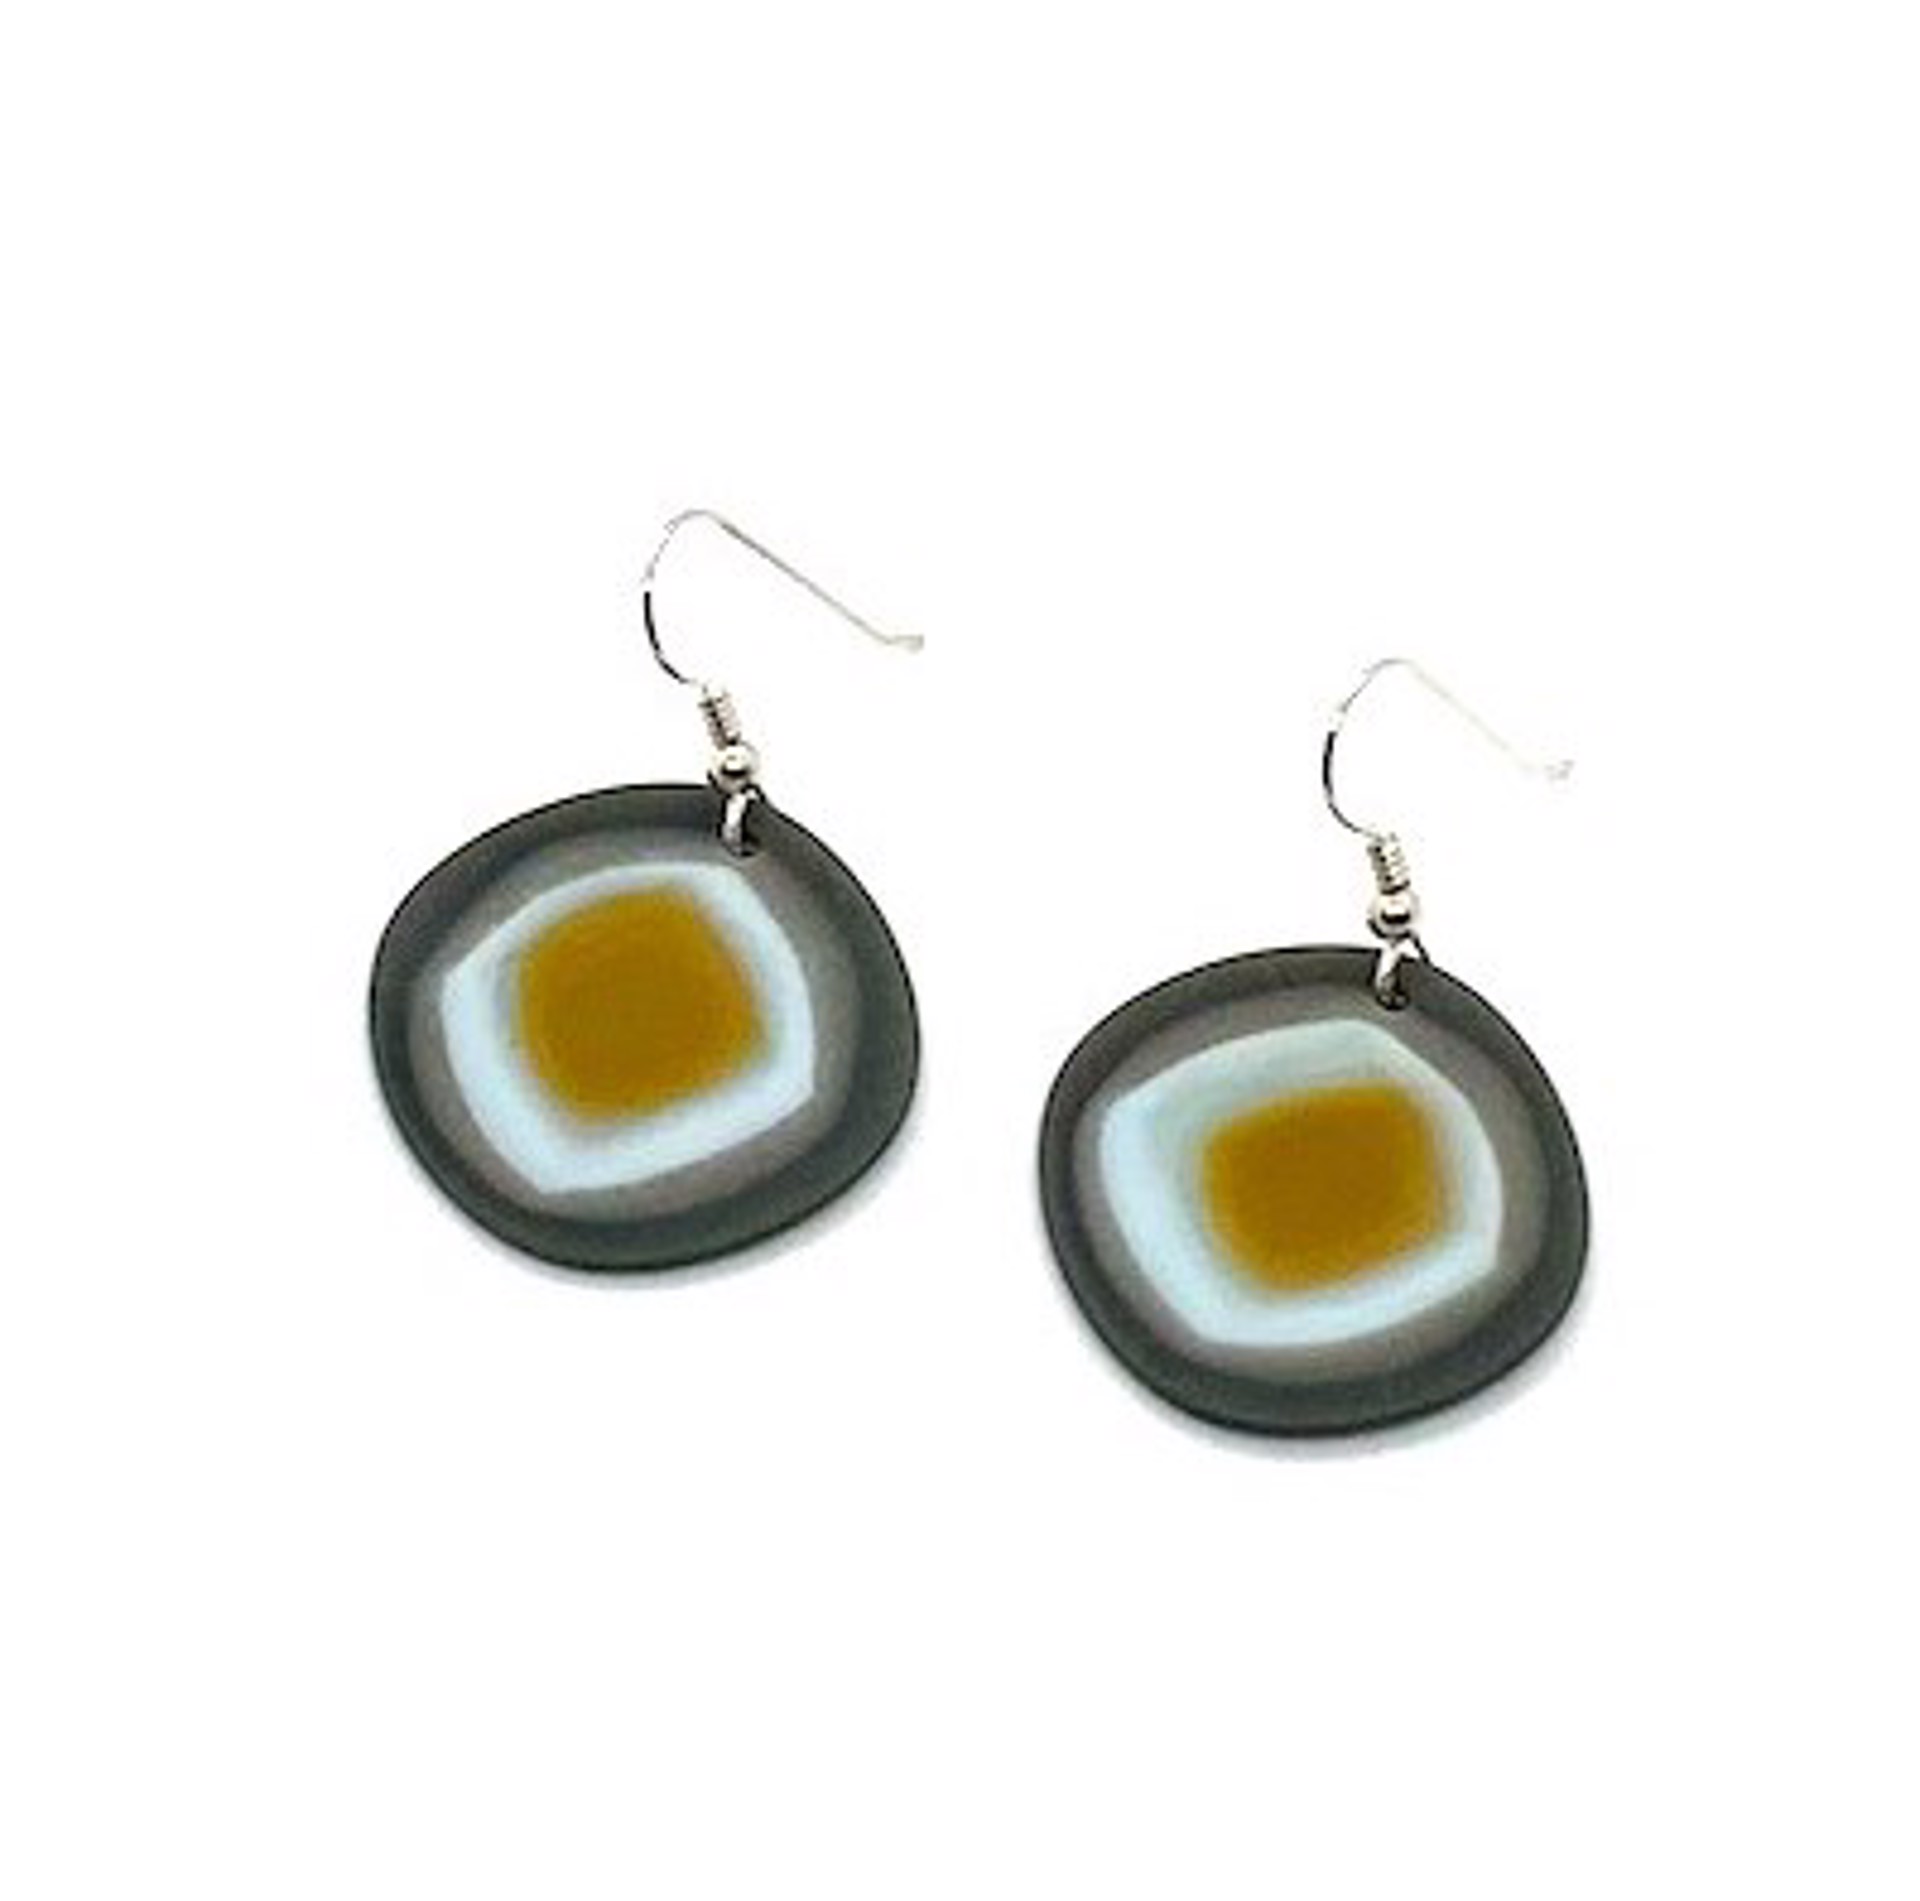 Compressed Glass Earrings by Chris Cox